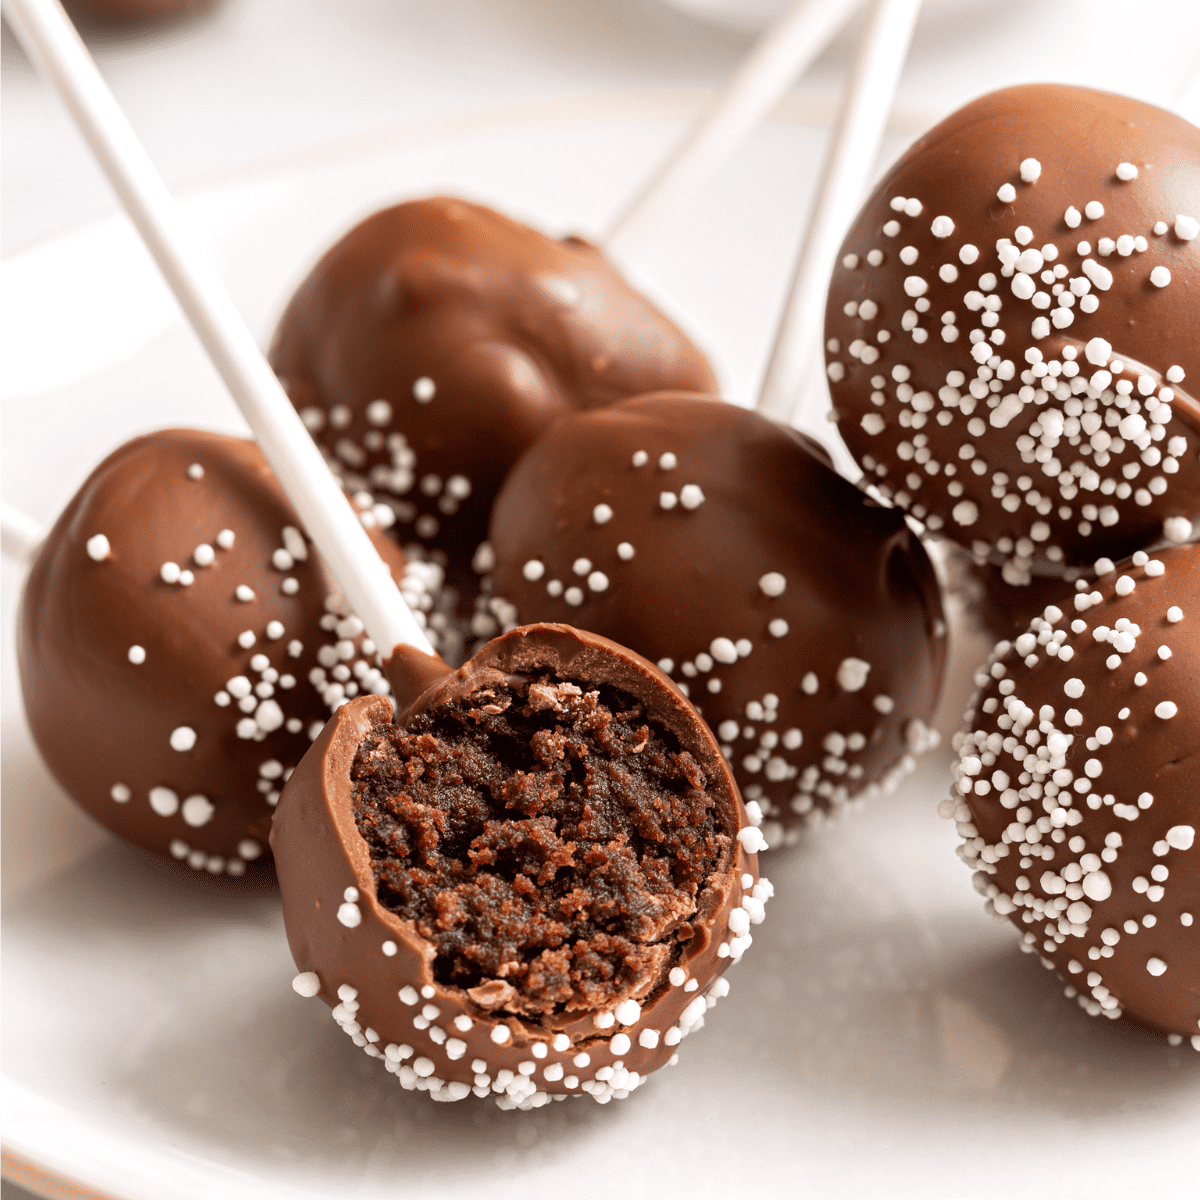 5 Tricks to Make Cake Pops More Easily  Cake pops how to make, Chocolate cake  pops, Cookie scoop